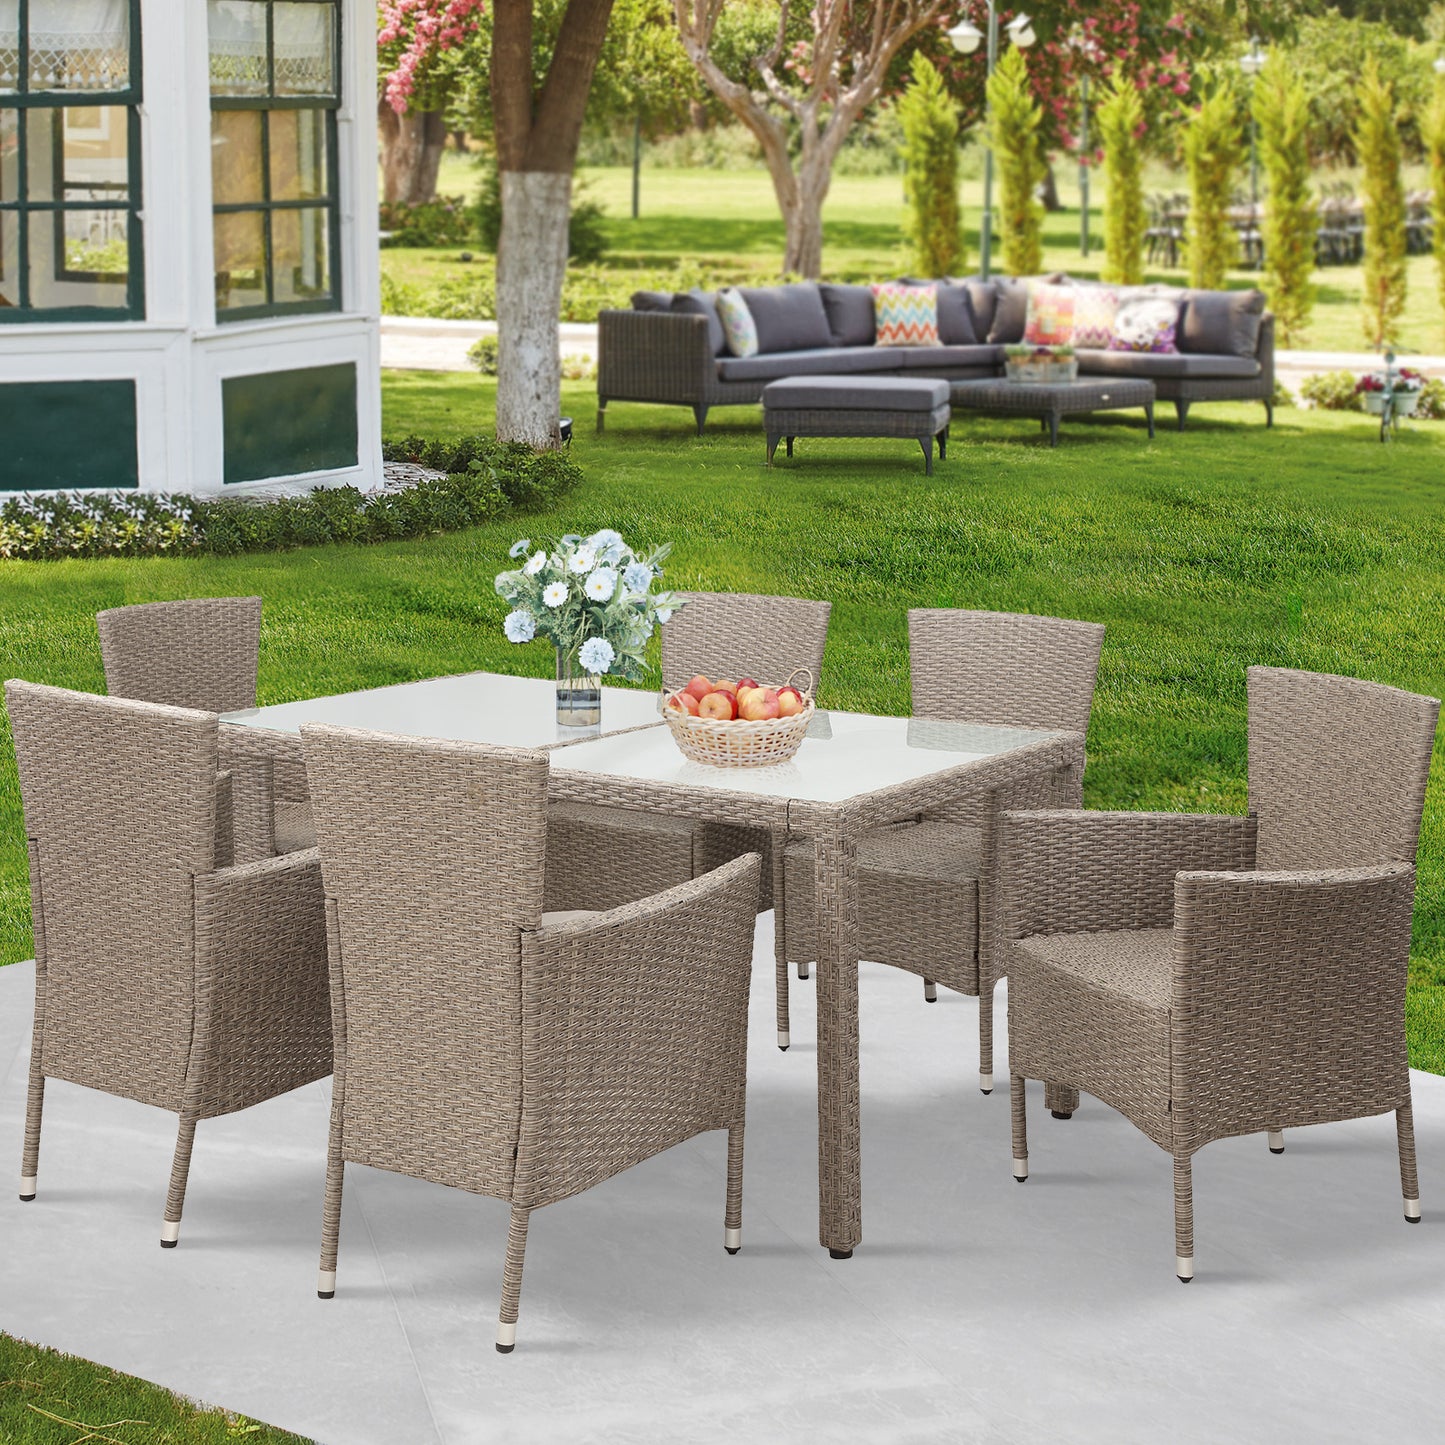 Outdoor Furniture Set, 7 Pieces Patio Dining Sets with 6 Chairs, Tempered Glass Top Table, and Soft Cushions, Outdoor Table and Chairs for Backyard Garden Poolside Deck, LJ3967